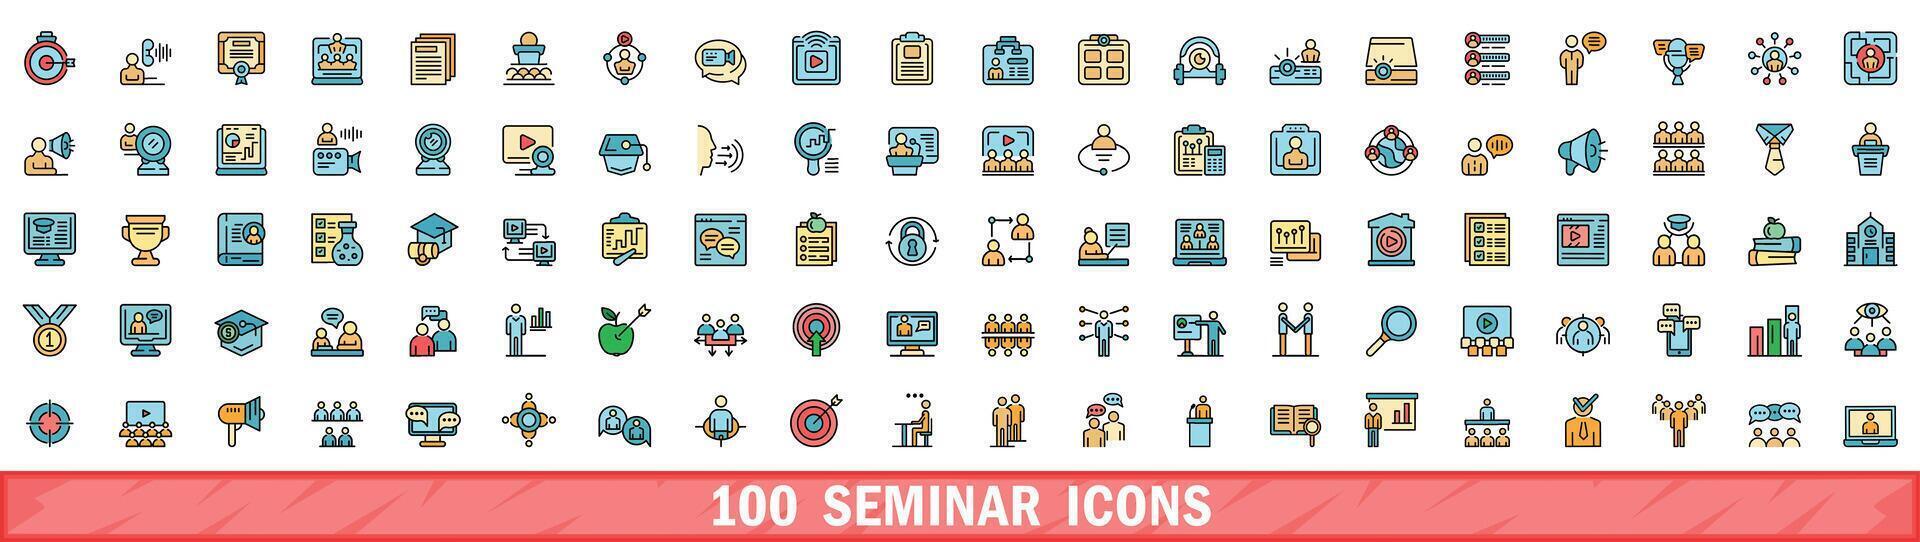 100 seminar icons set, color line style vector